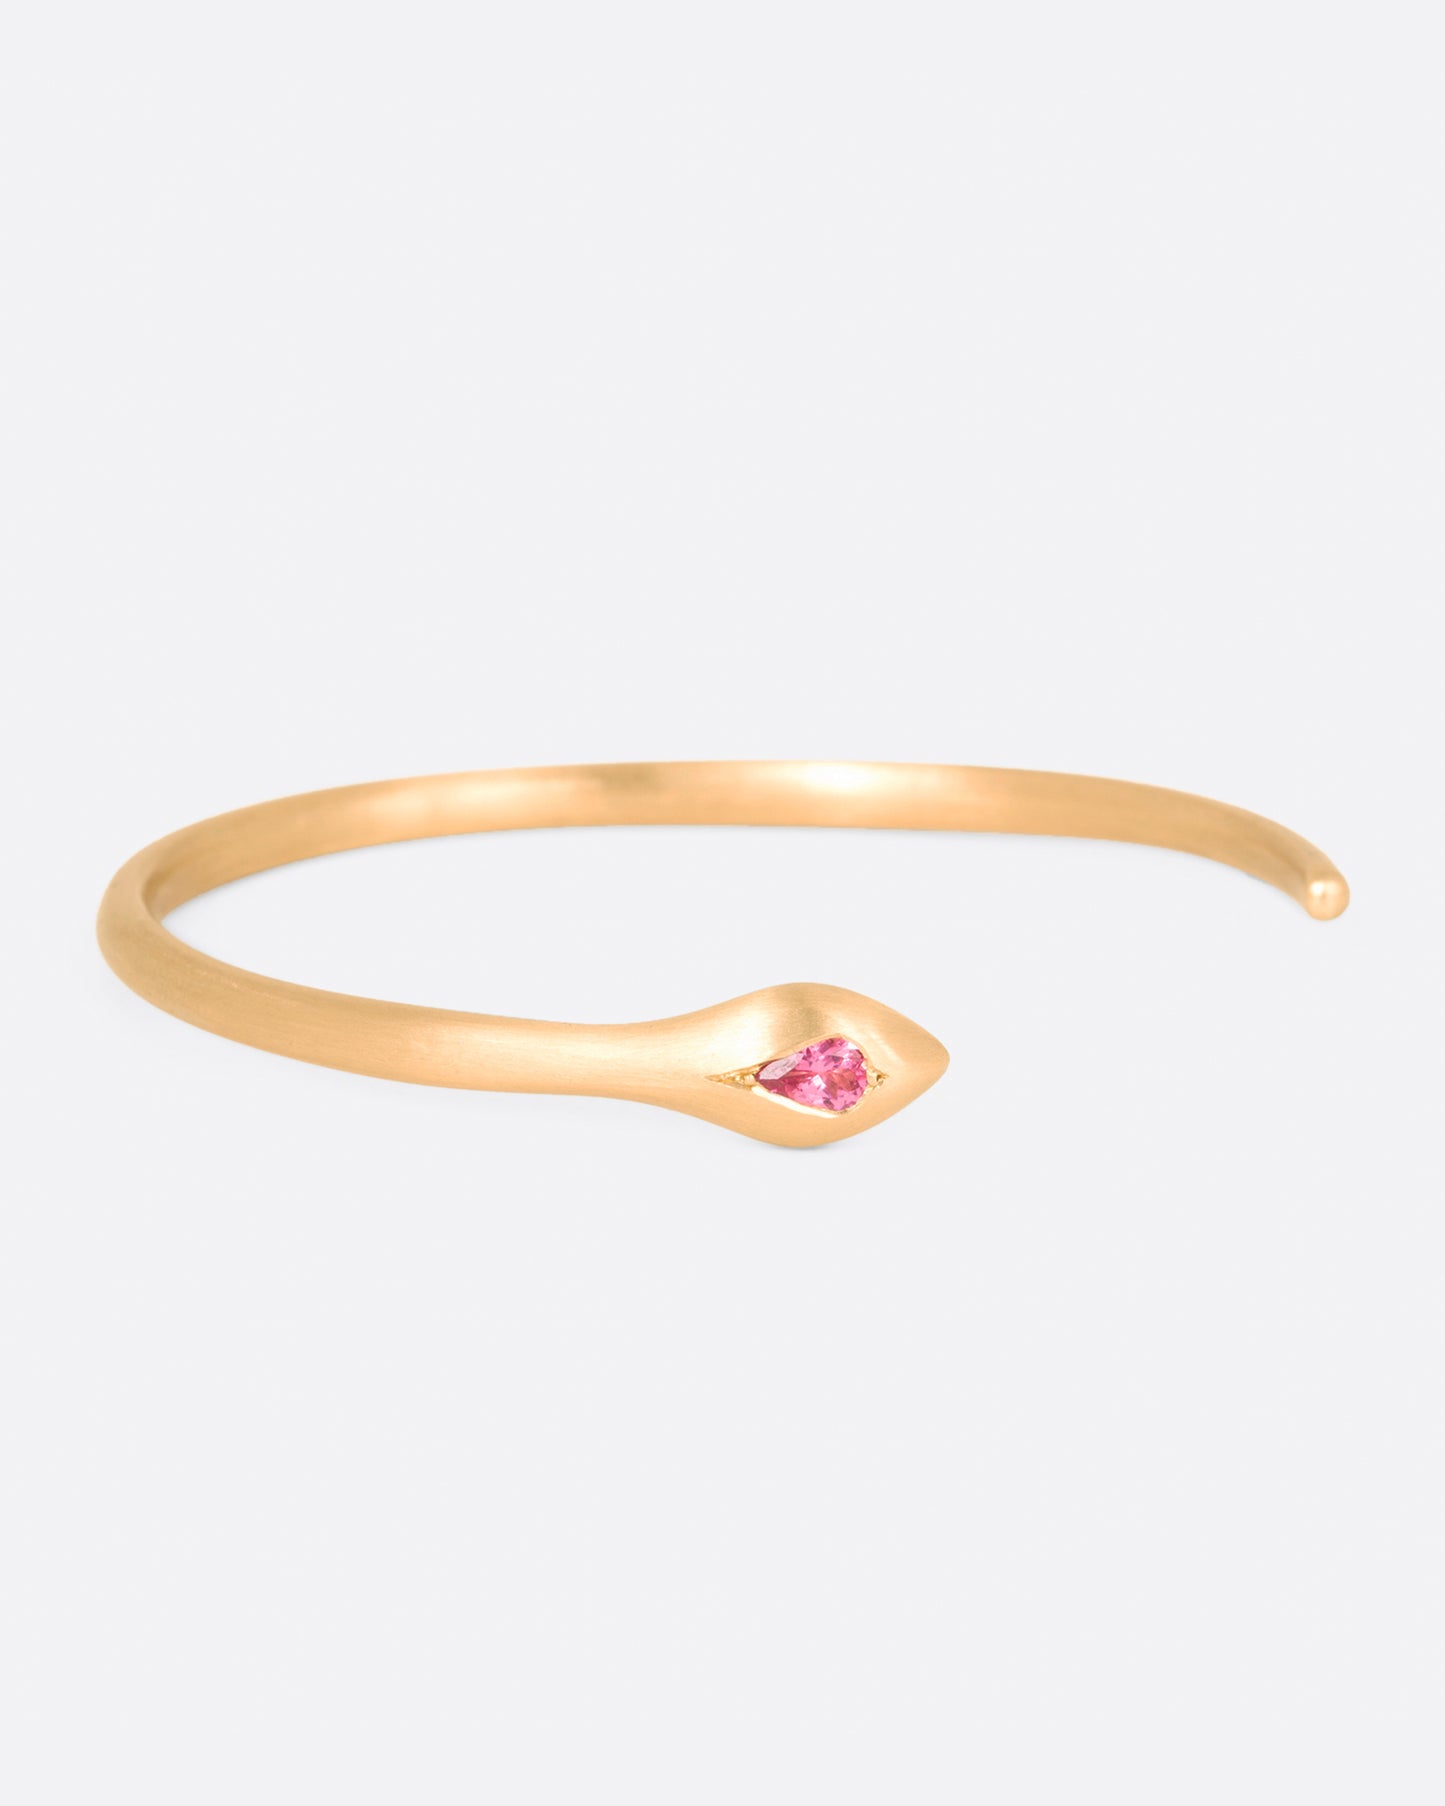 A matte yellow gold snake cuff bracelet with a pear shaped pink sapphire on its head, shown from the front.